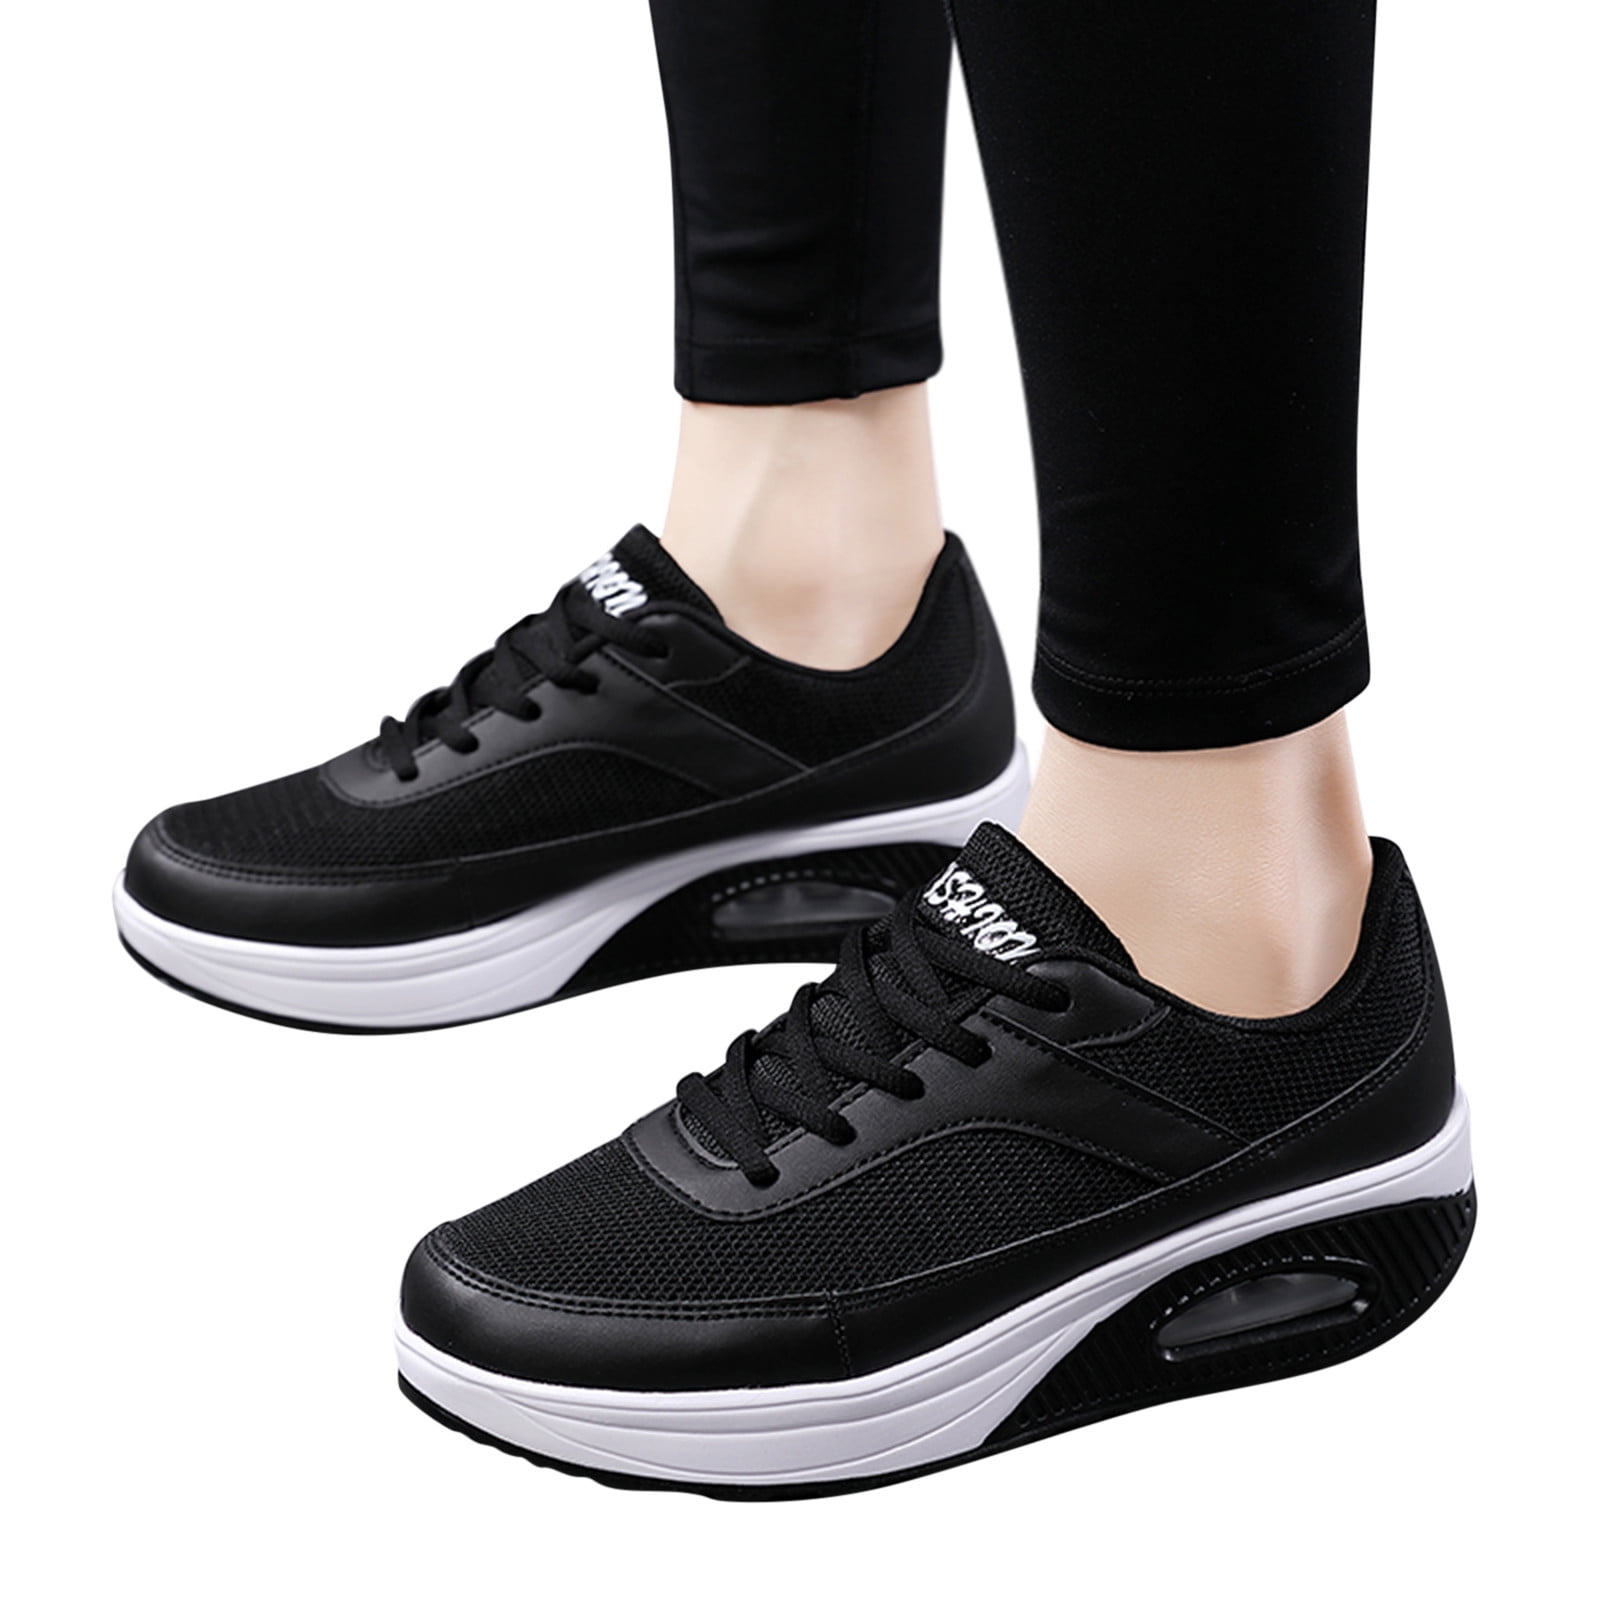  New Women's Floral Breathable Sheer Mesh Sneakers,Cutouts Lace  Casual Shoes,Mesh Knitted Upper Low Cut Casual Shoes (Black, Adult, Women,  Numeric_4, Numeric, us_Footwear_Size_System, Medium)